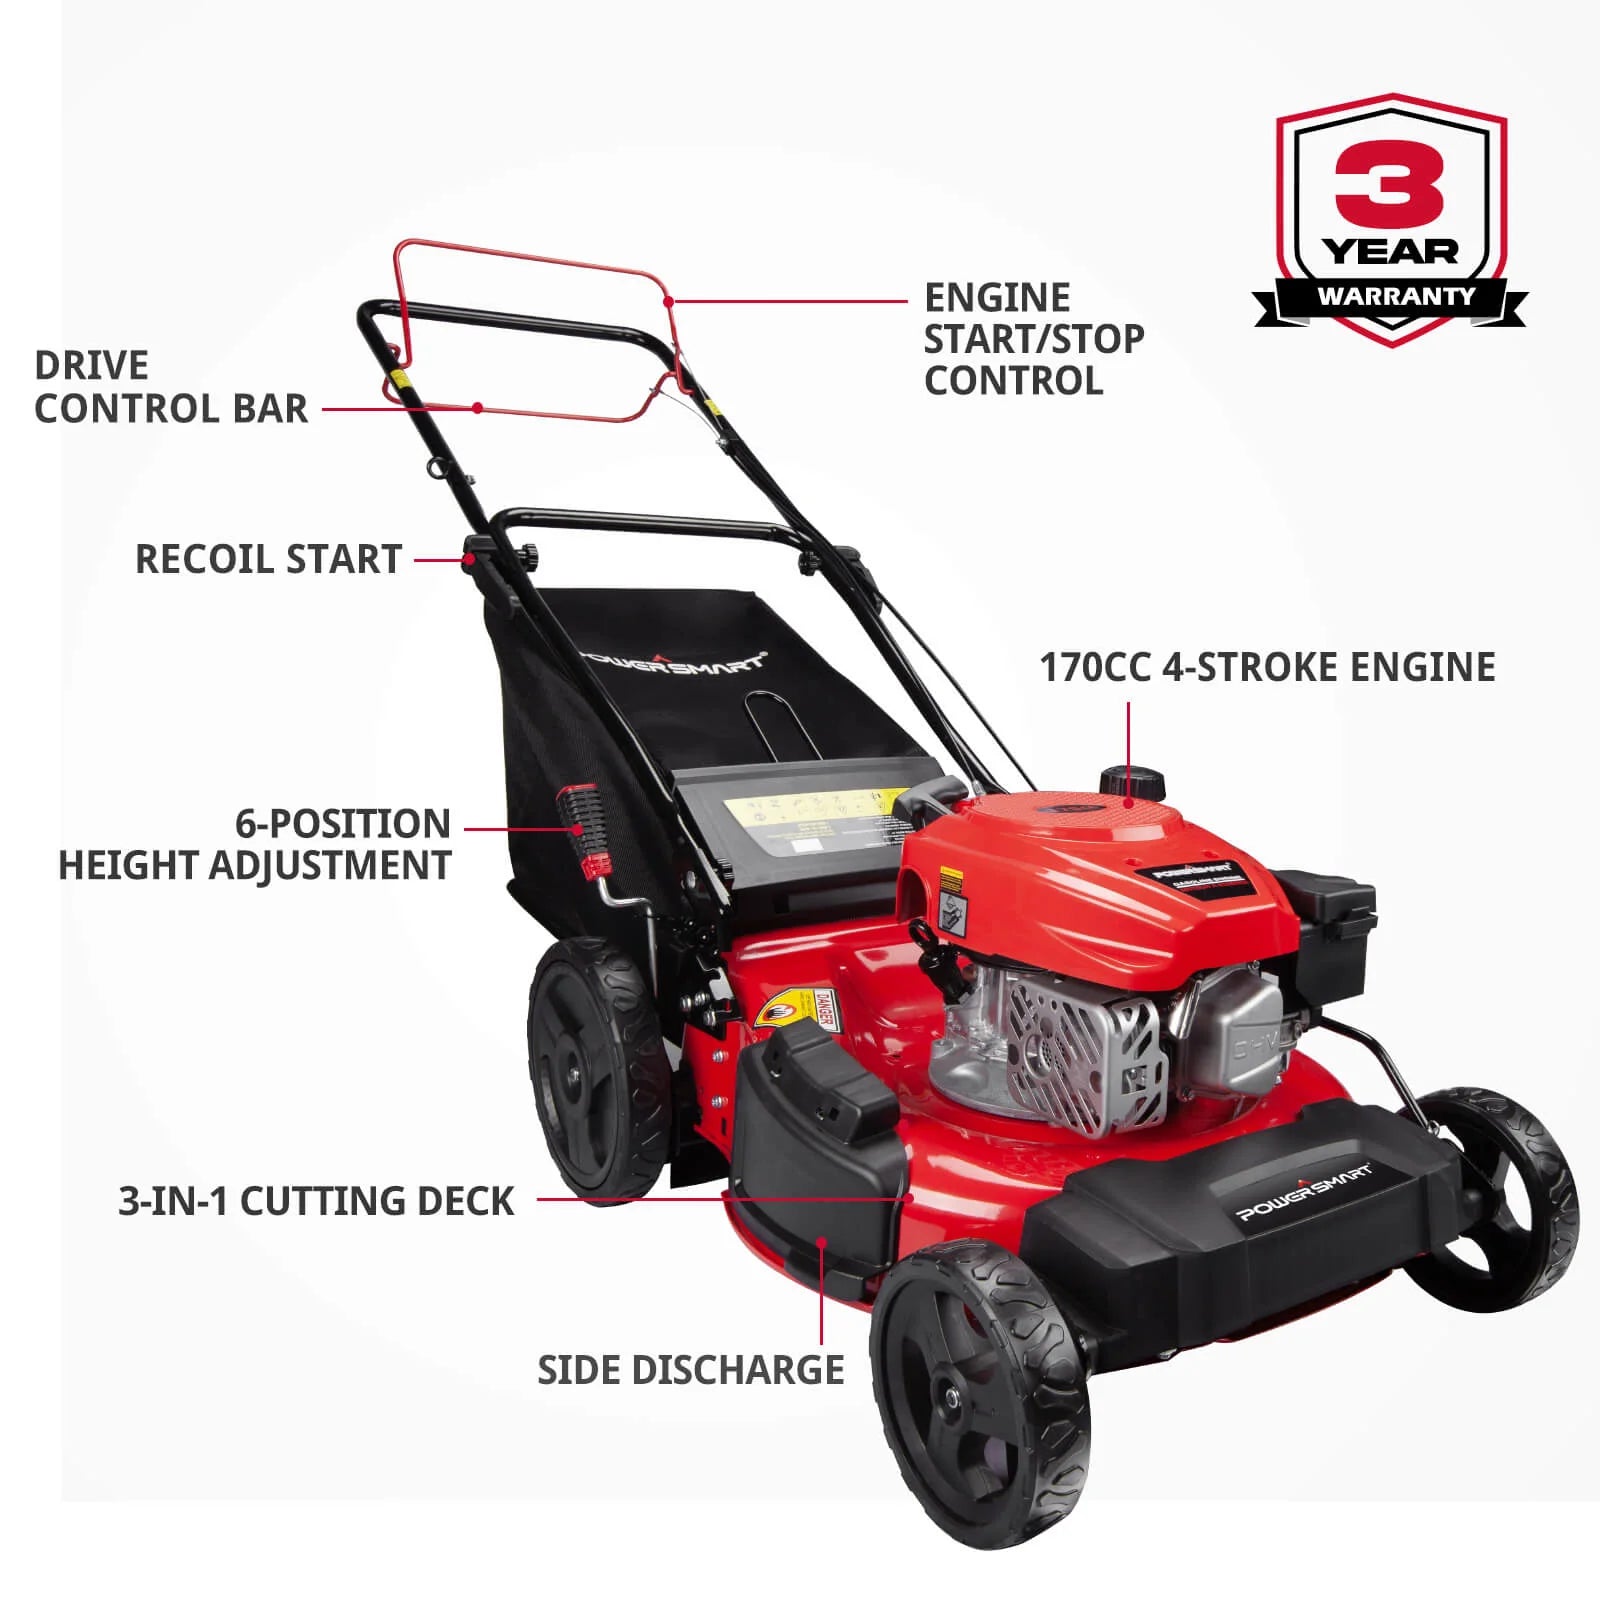 Powersmart, Powersmart DB8621AS 3-In-1 Lawn Mower 21" Self-Propelled 170cc Gas Engine Red New